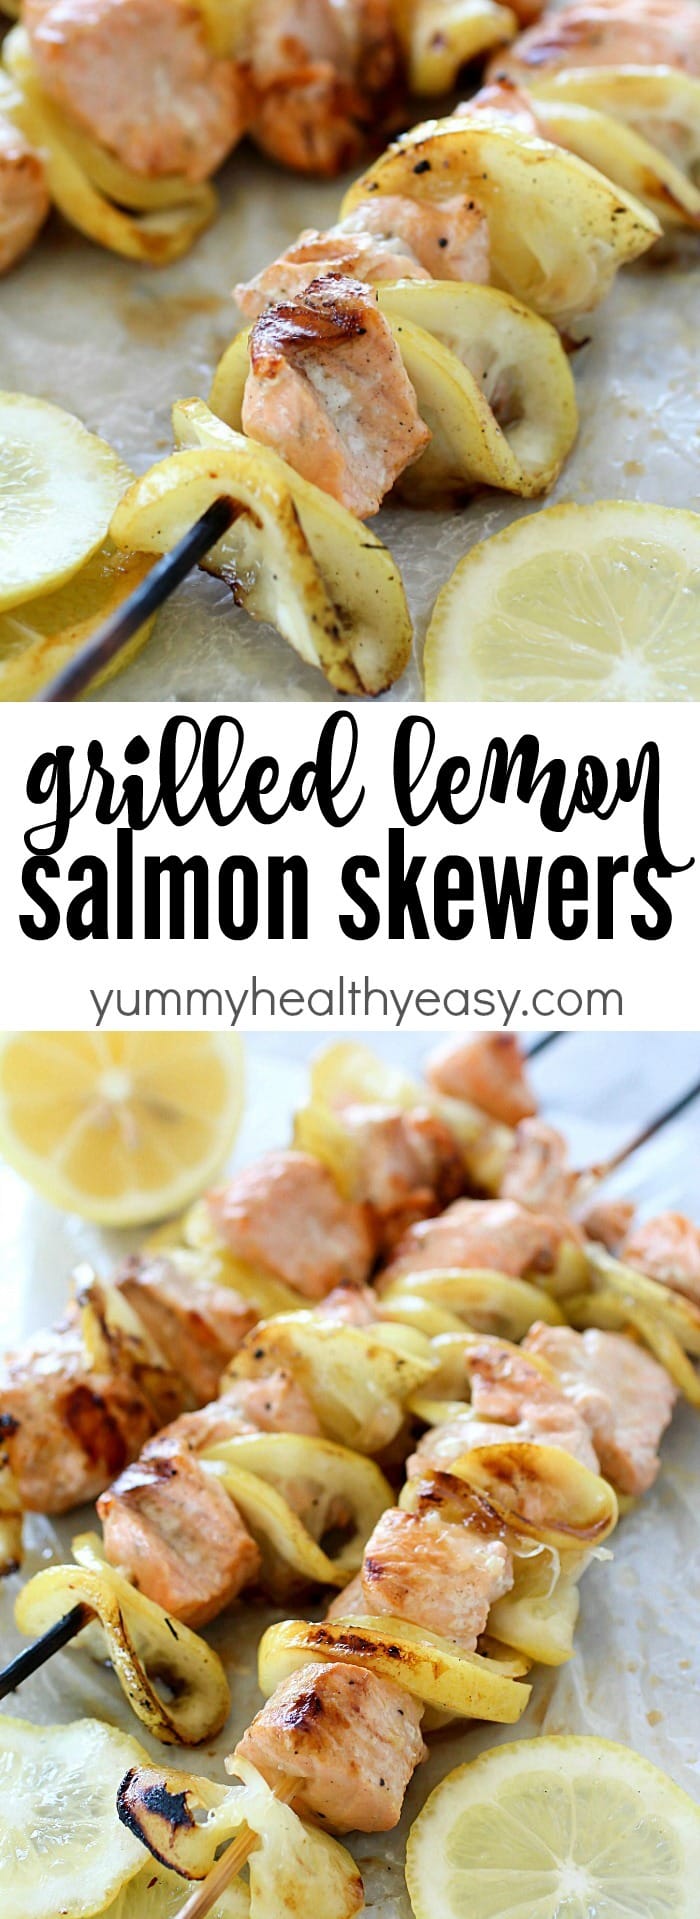 Salmon Skewers tossed in a garlic-lemon sauce and then grilled. So simple and so flavorful! Salmon and citrus is combined to create the result of a crazy delicious, tender, lemony salmon that is like heaven on a stick!